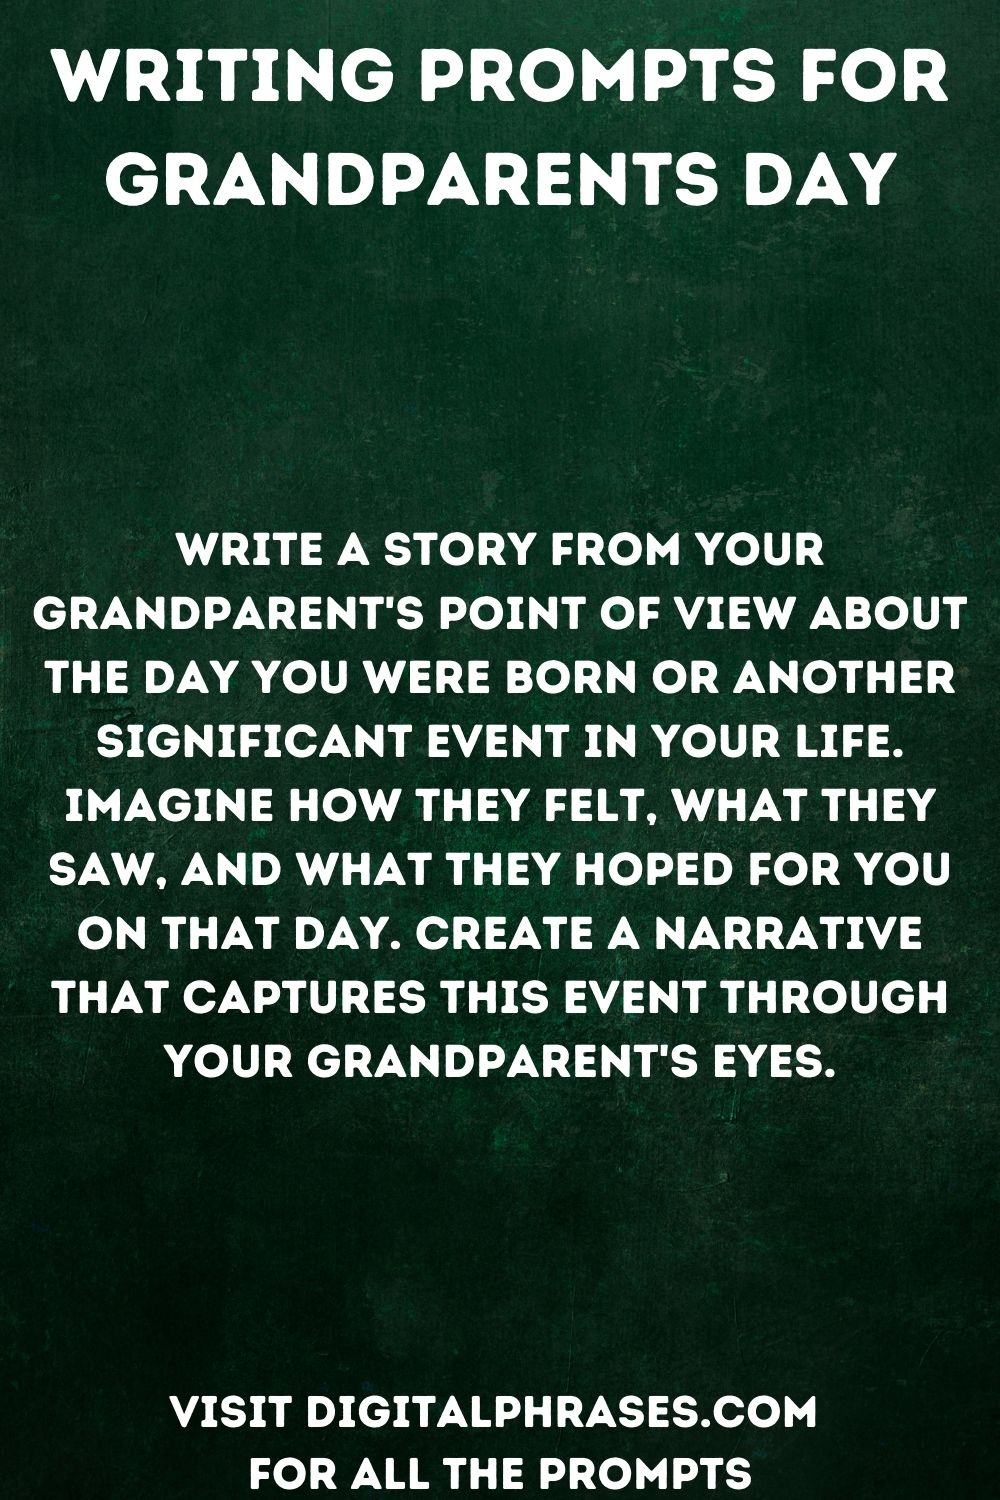 28 Writing Prompts For Grandparents Day